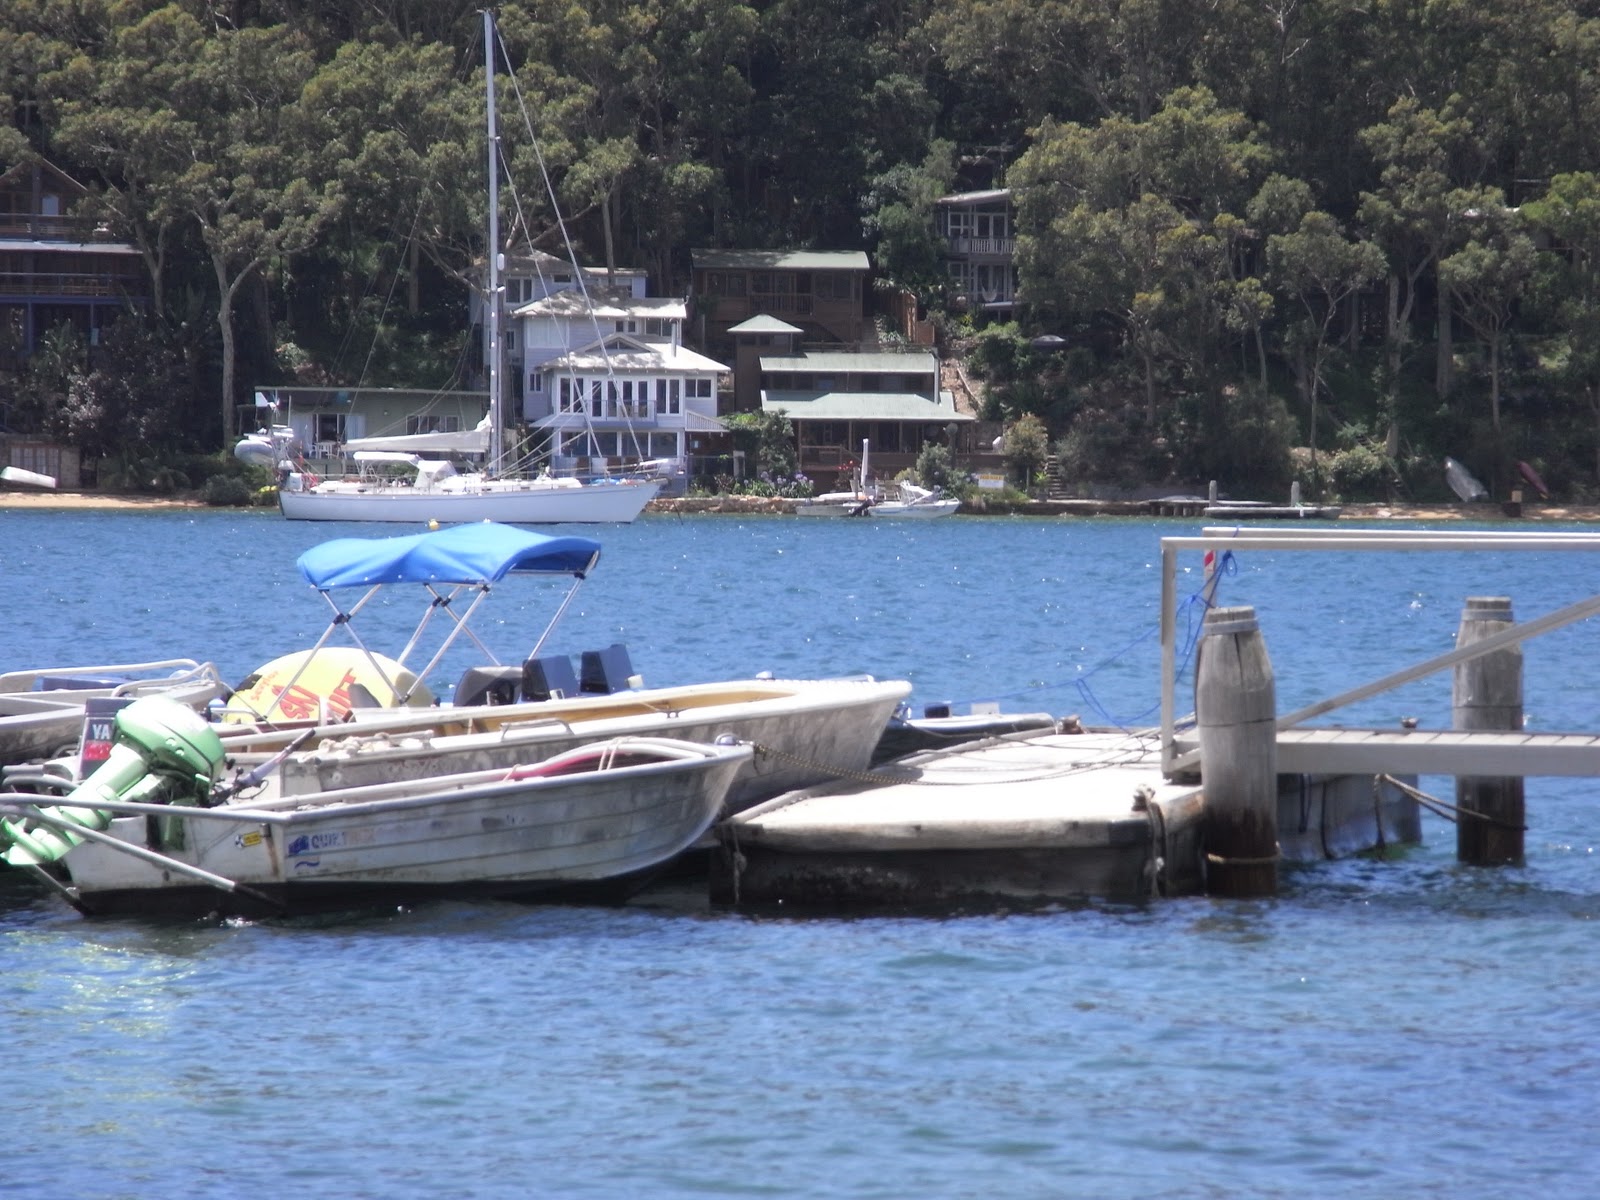 Jenni's beads: Sydney- A Trip to the Pittwater